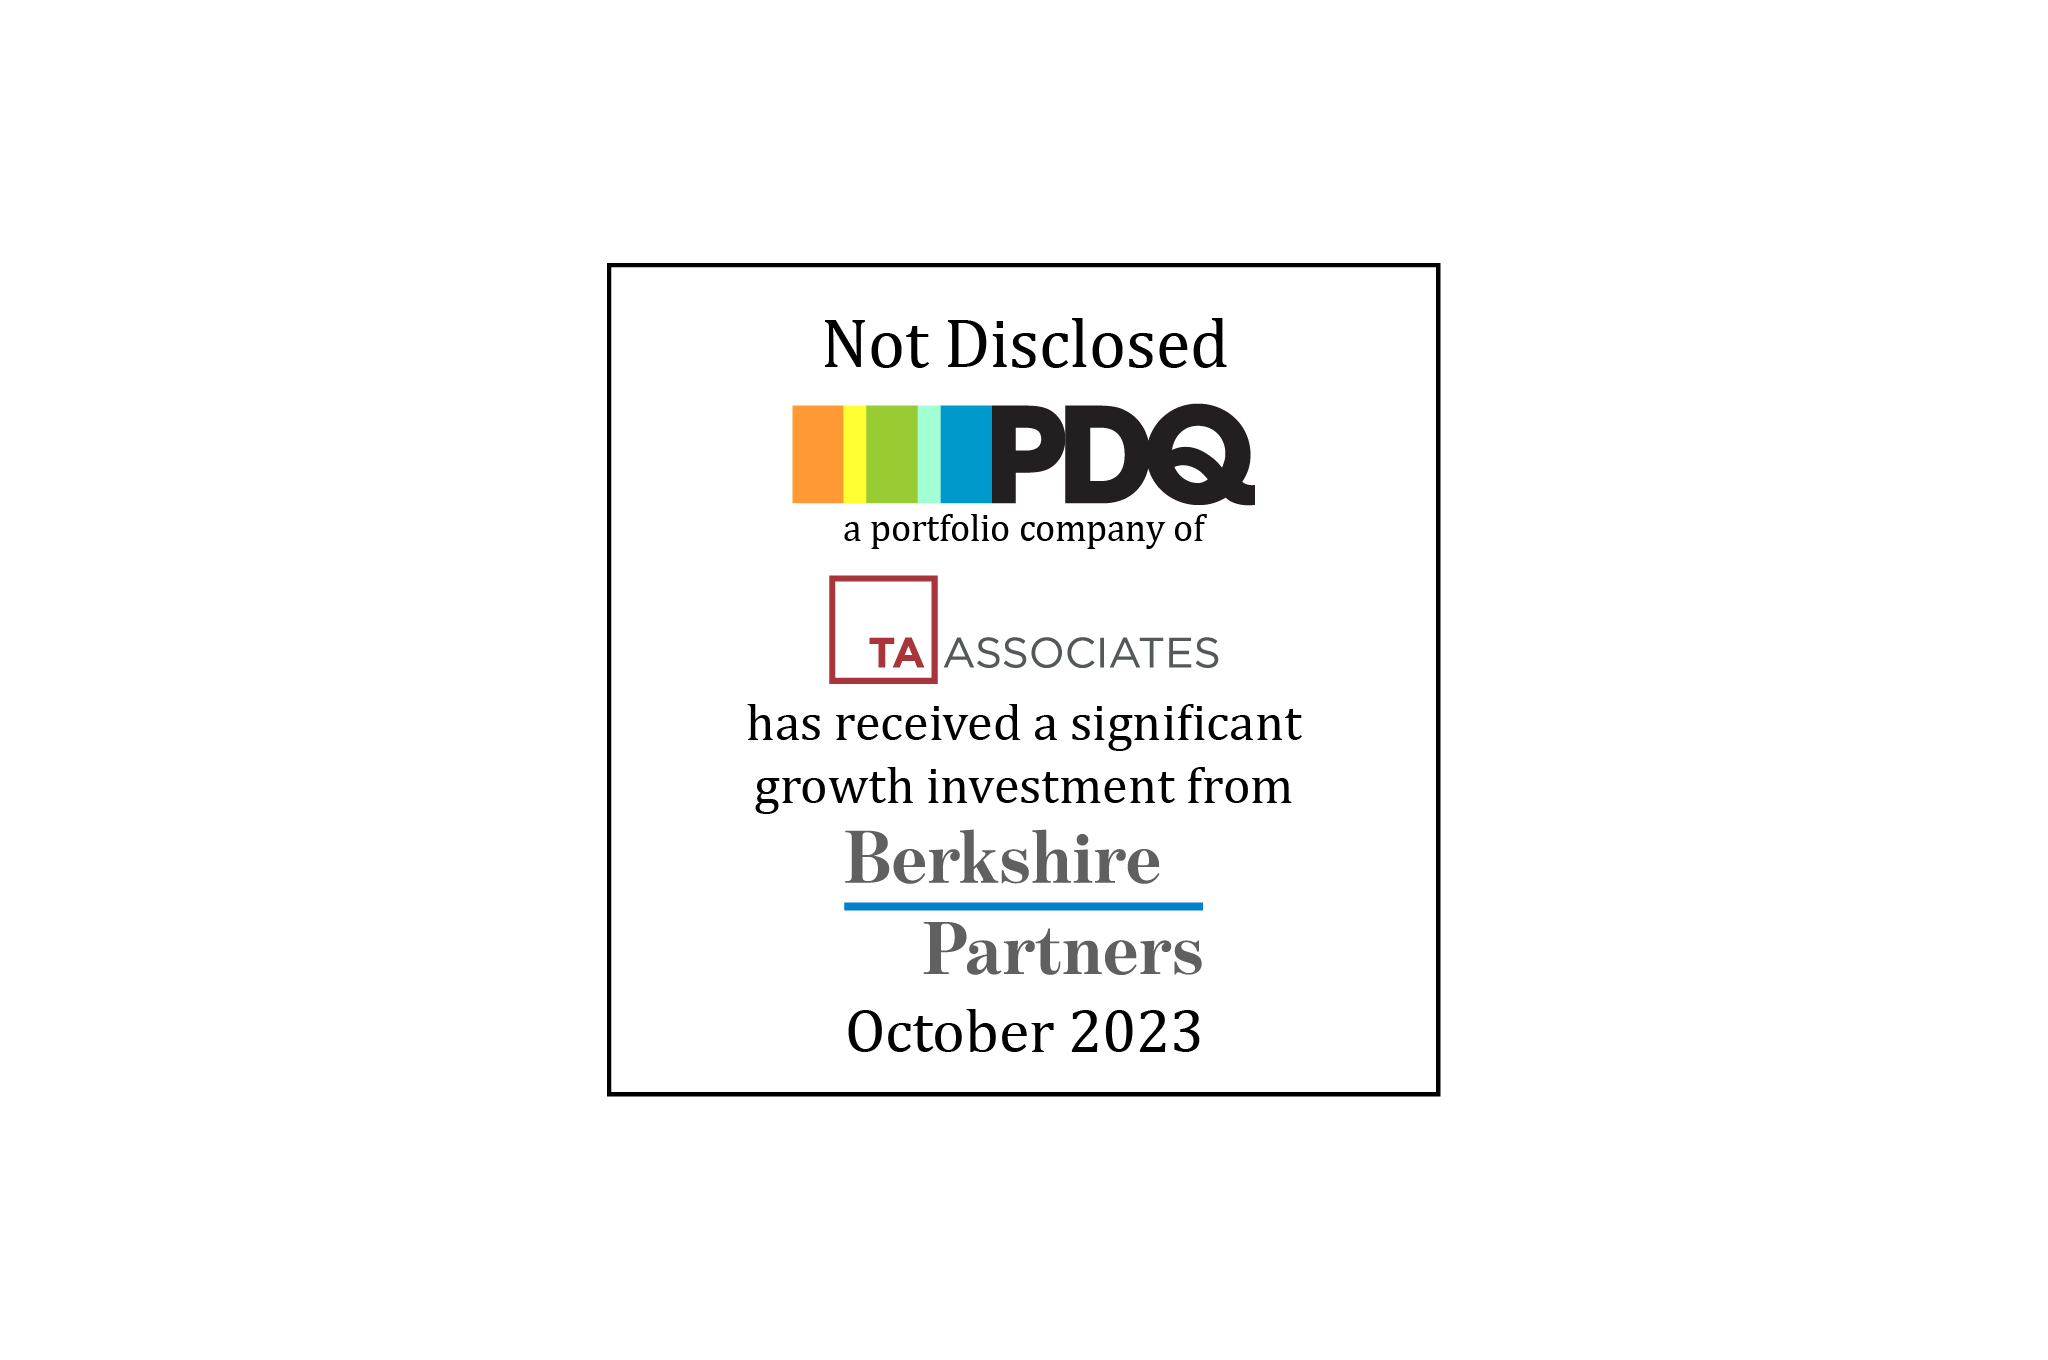 Not Disclosed | PDQ, a portfolio company of TA Associates, has received a significant growth investment from Berkshire Partners | October 2023